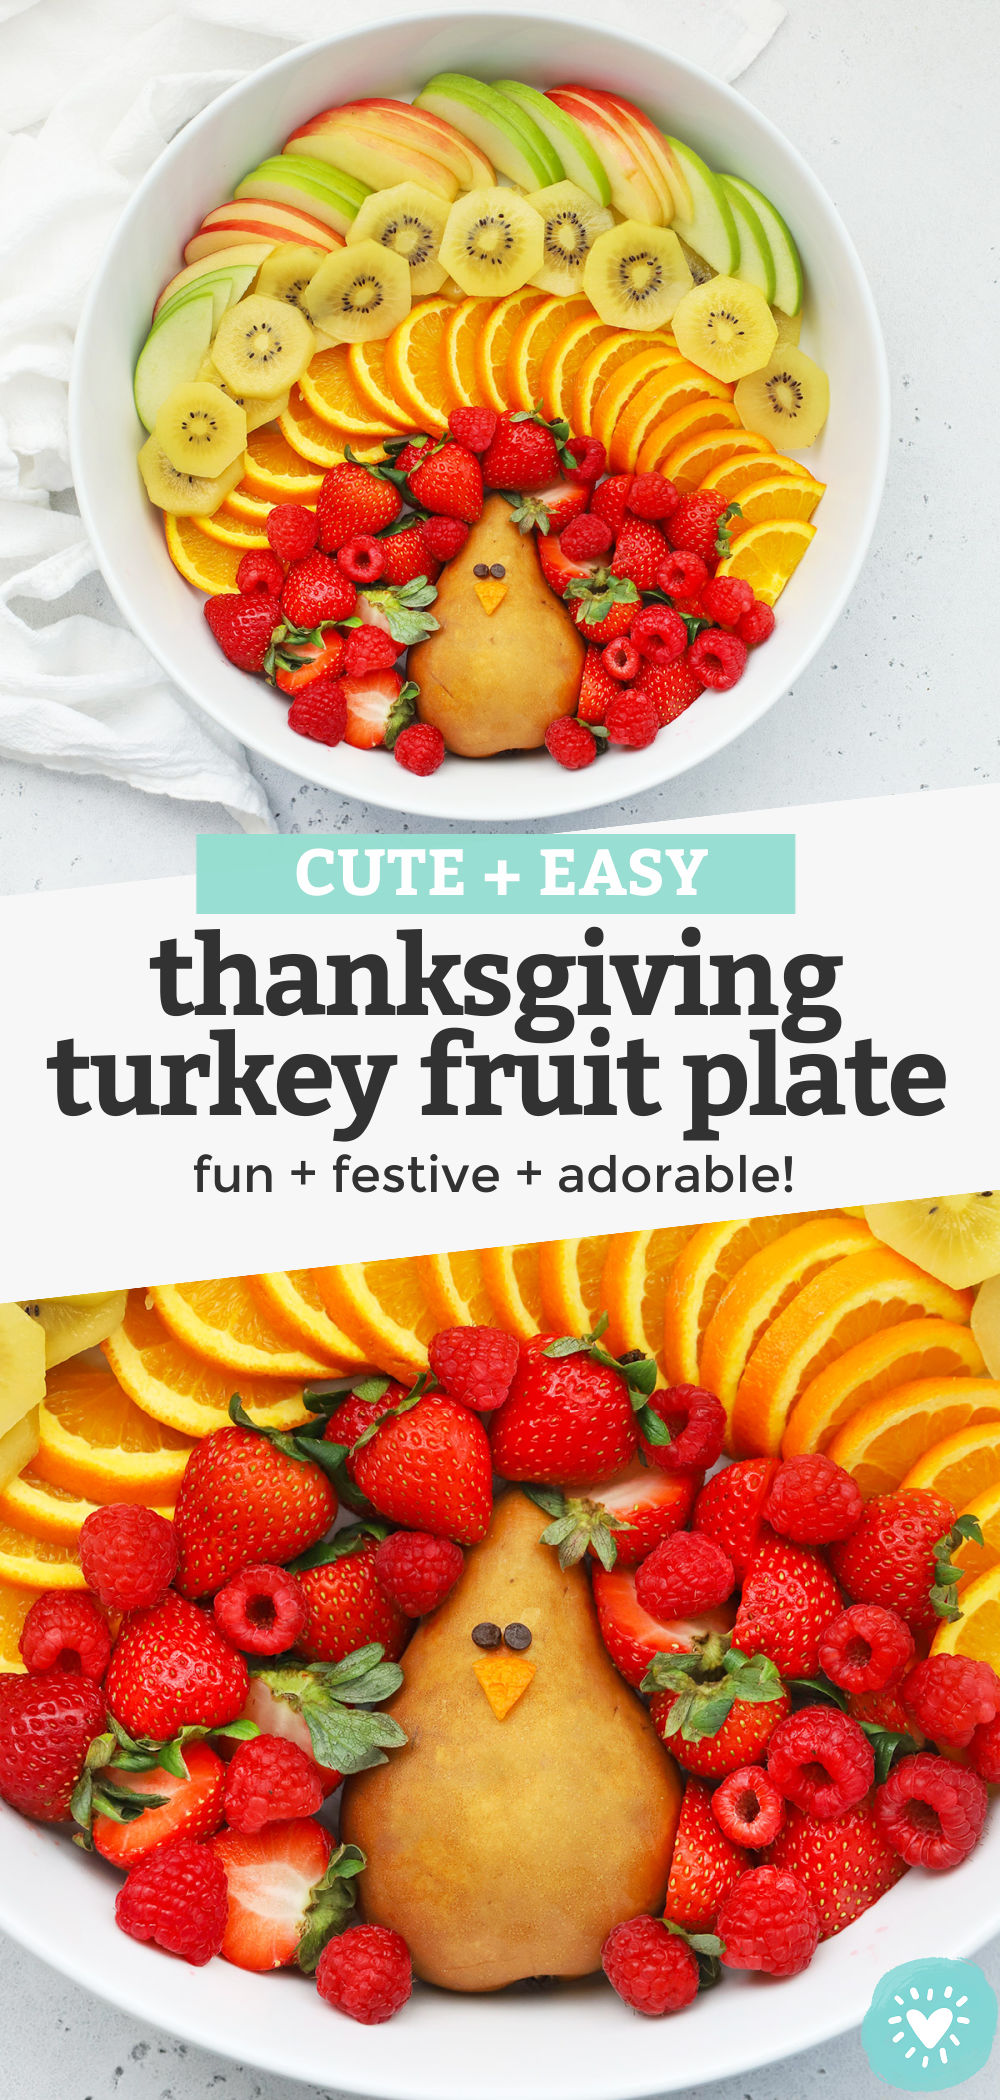 Thanksgiving Turkey Fruit Plate - This turkey-shaped Thanksgiving fruit platter looks adorable at holiday get-togethers and parties. It's a favorite with kids and grown-ups alike! (Naturally gluten-free, vegan & paleo) // Thanksgiving Appetizer // Thanksgiving Snack // Thanksgiving Fruit Platter // Turkey Fruit Platter // Fall Appetizer //